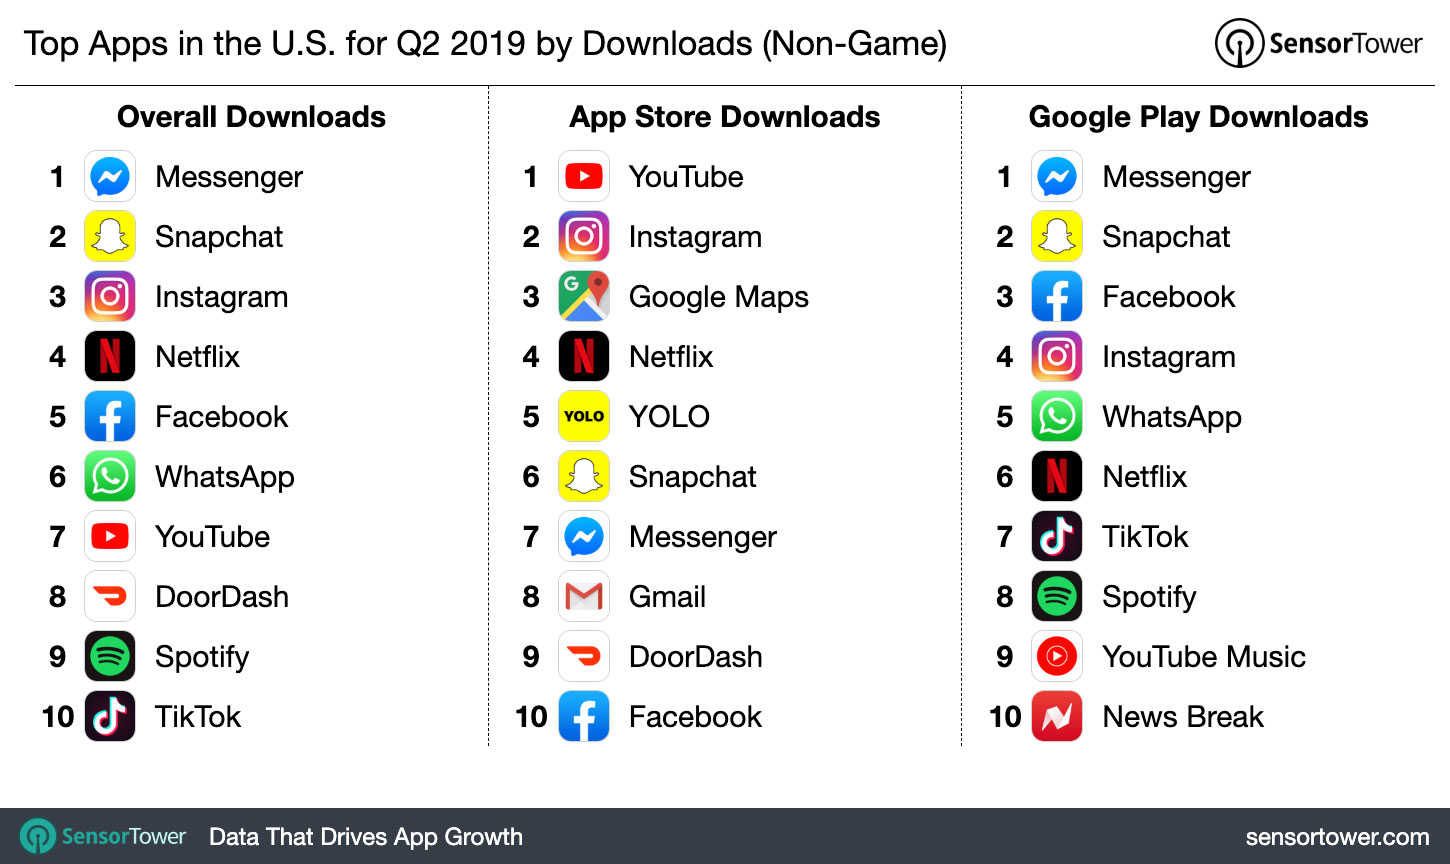 Top Apps in the U.S. for Q2 2019 by Downloads